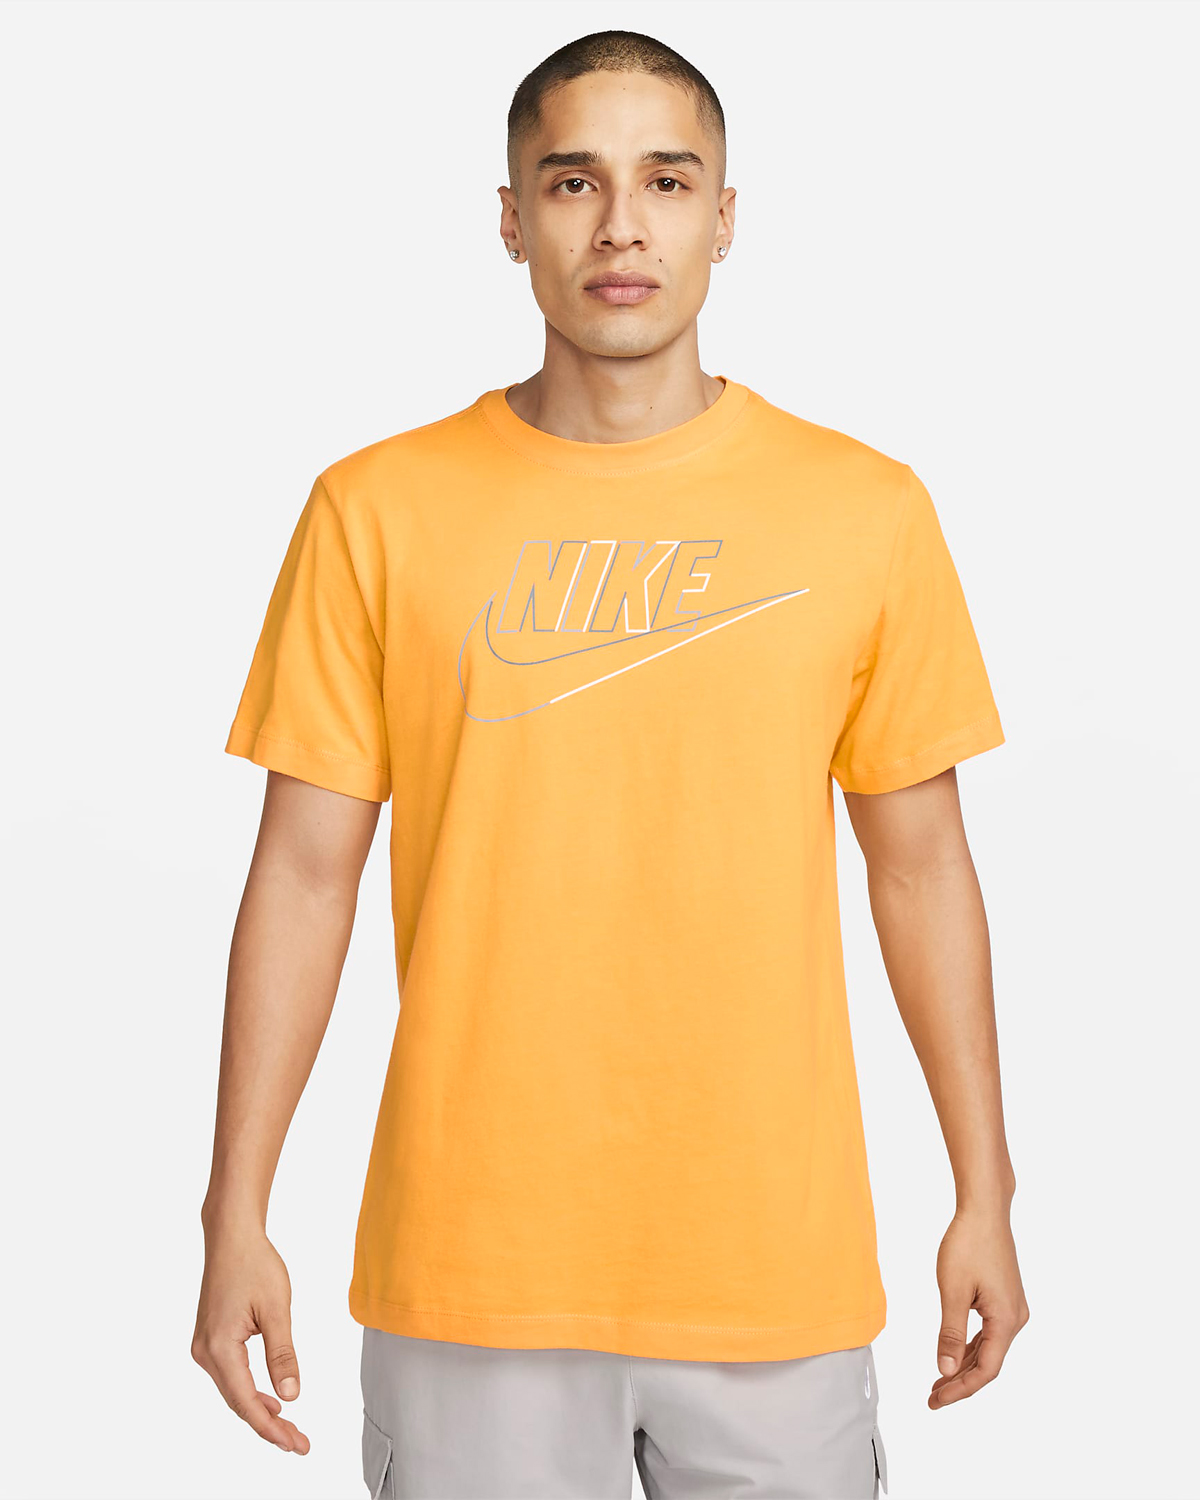 Nike University Gold Shirts Clothing Sneakers Outfits